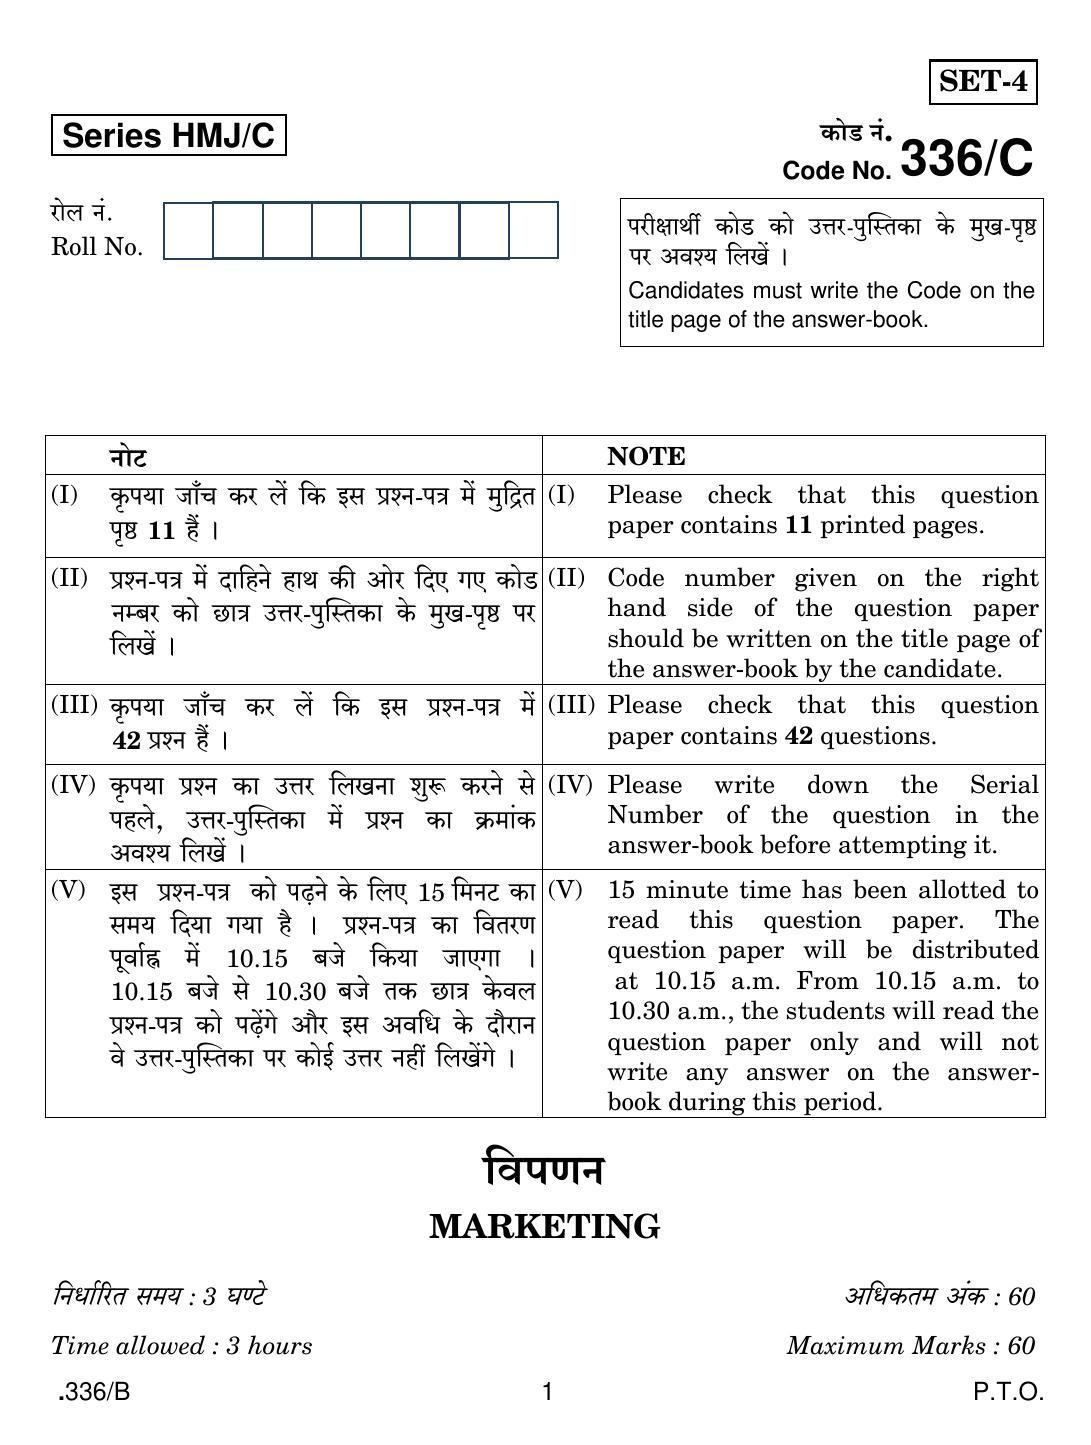 CBSE Class 12 Marketing 2020 Compartment Question Paper - Page 1